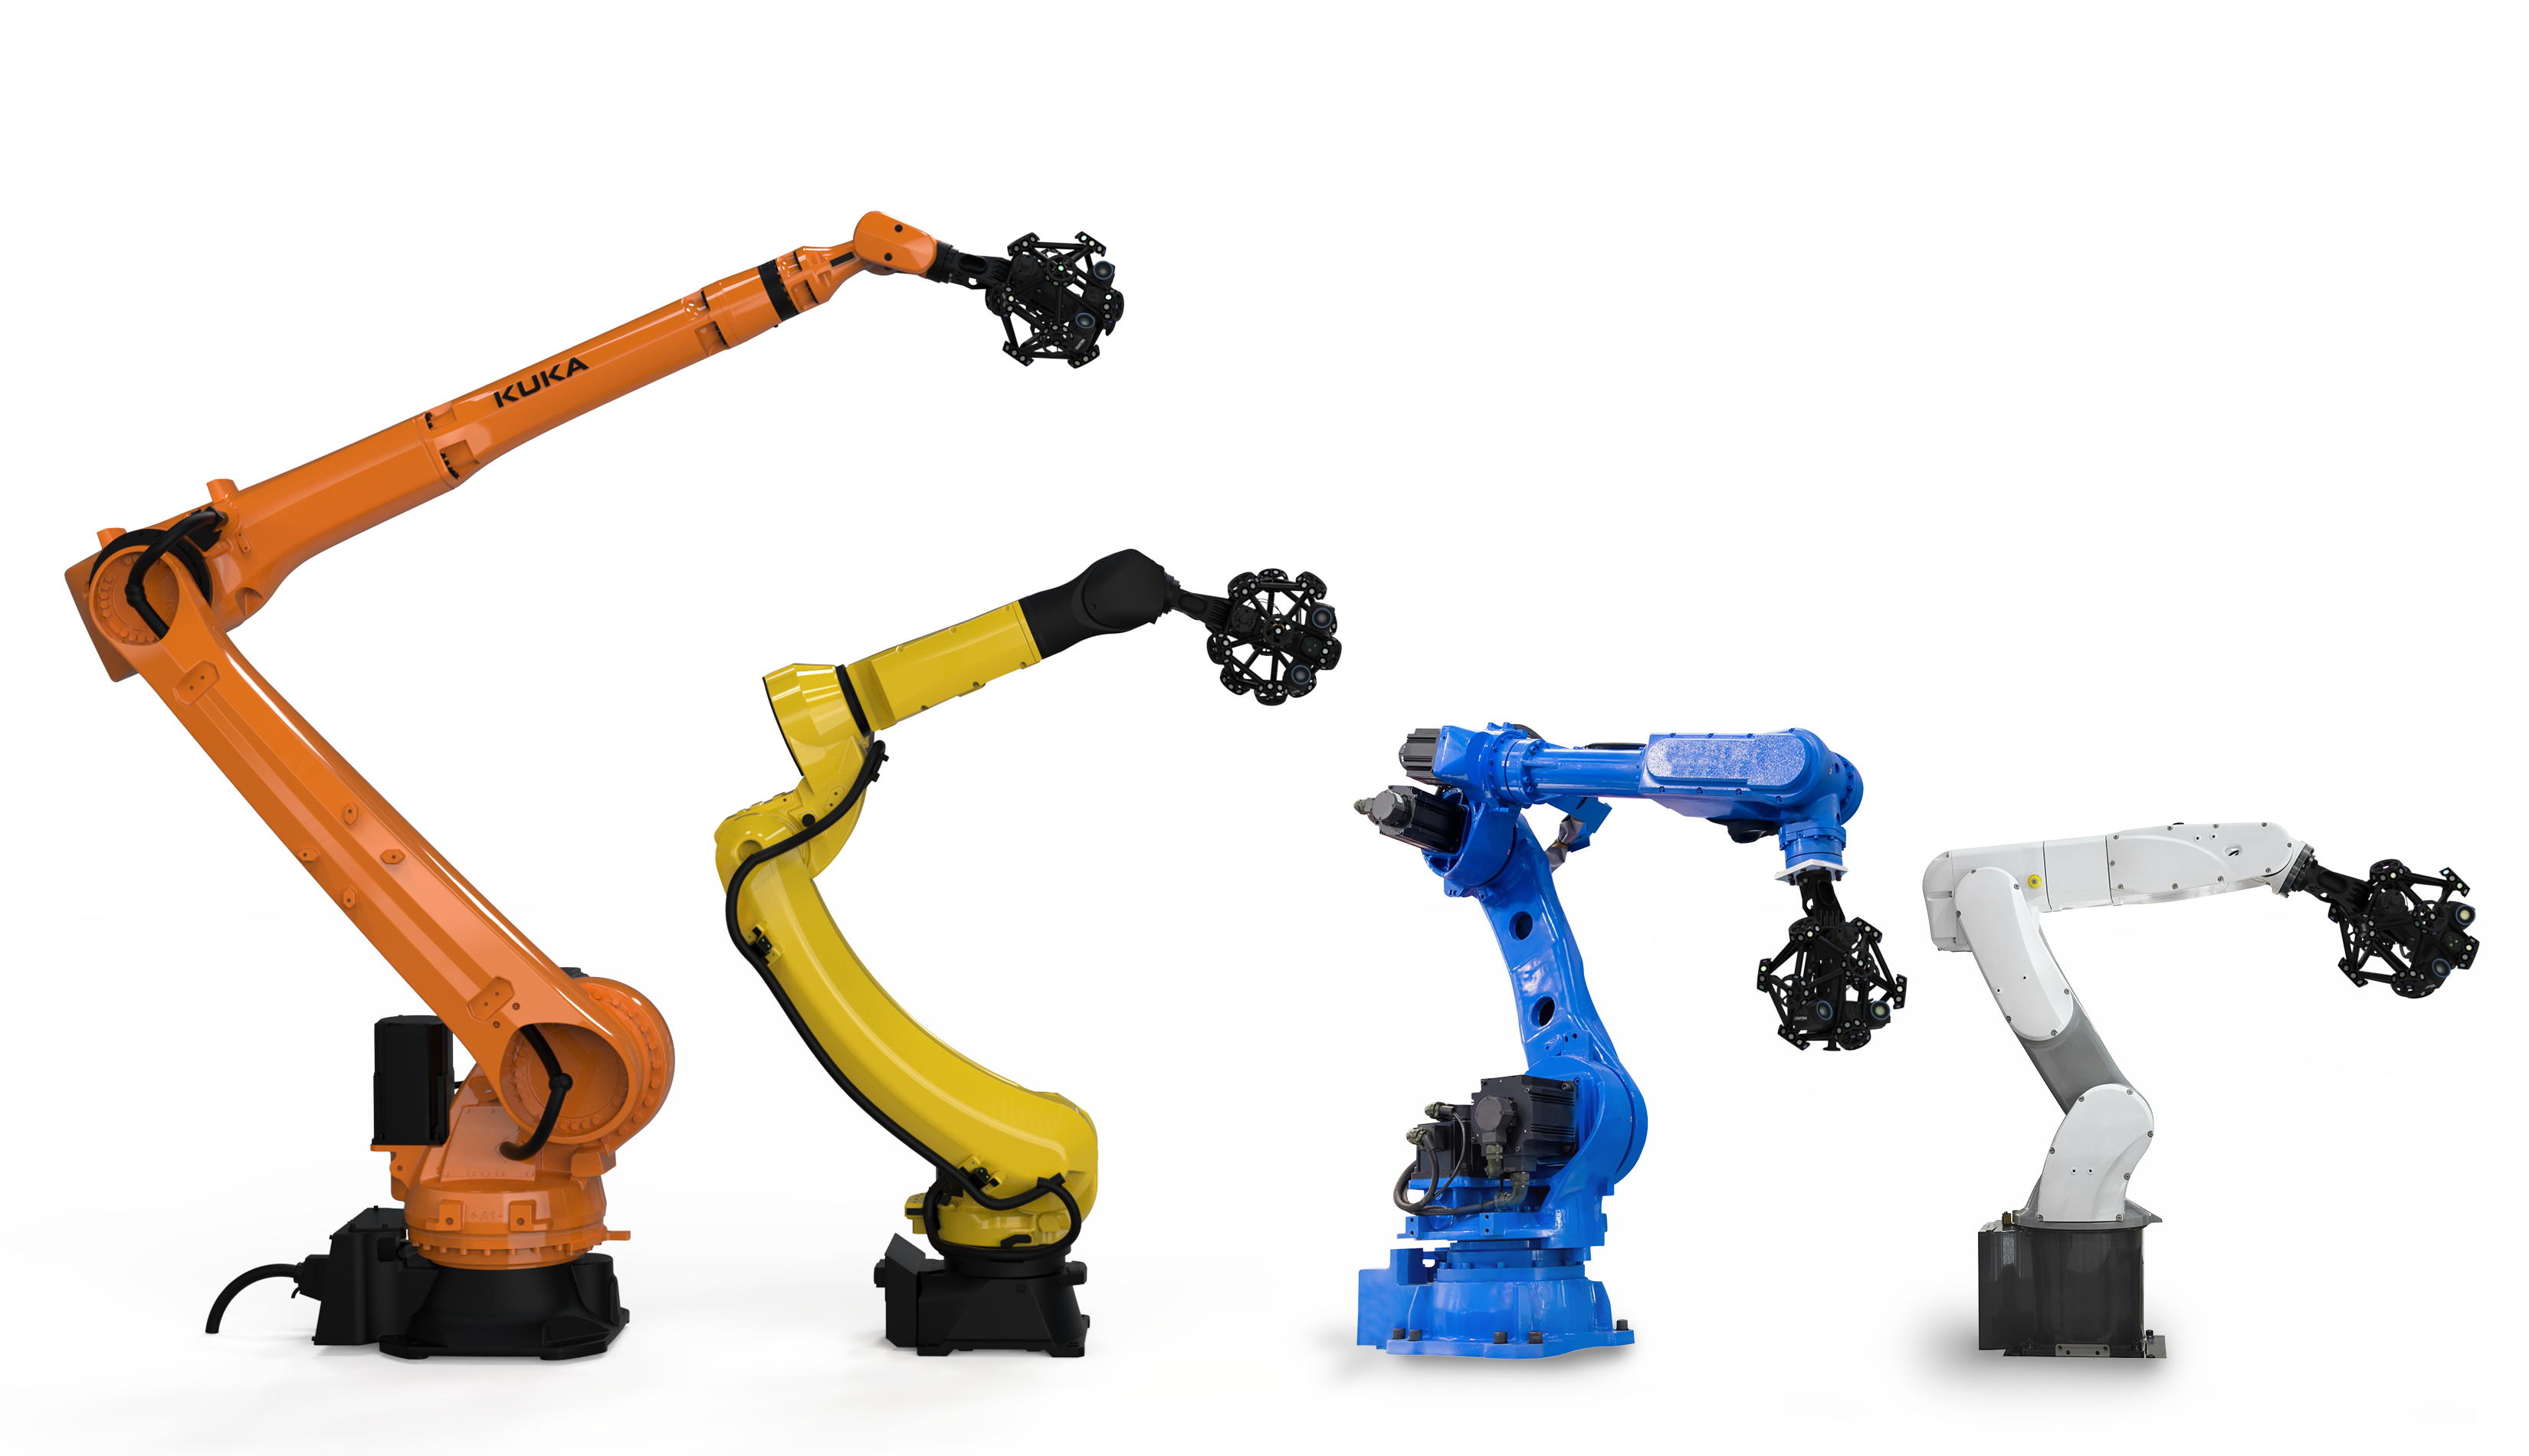 Four industrial robot arms of different sizes and different colors with optical CMM scanners attached to them.